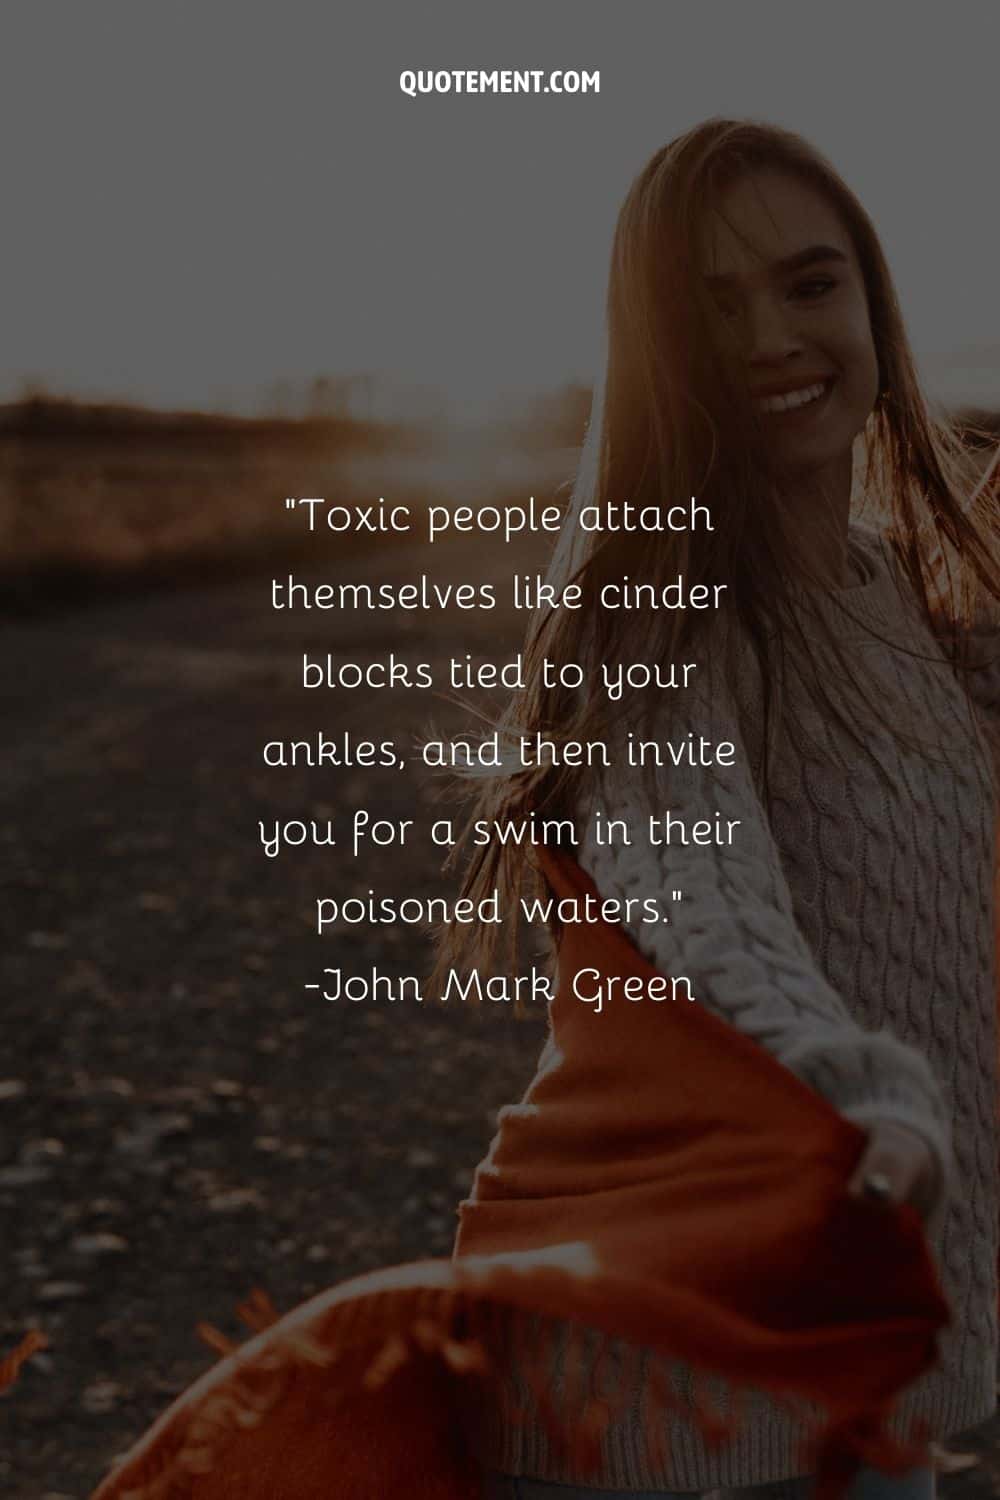 Toxic people attach themselves like cinder blocks tied to your ankles, and then invite you for a swim in their poisoned waters